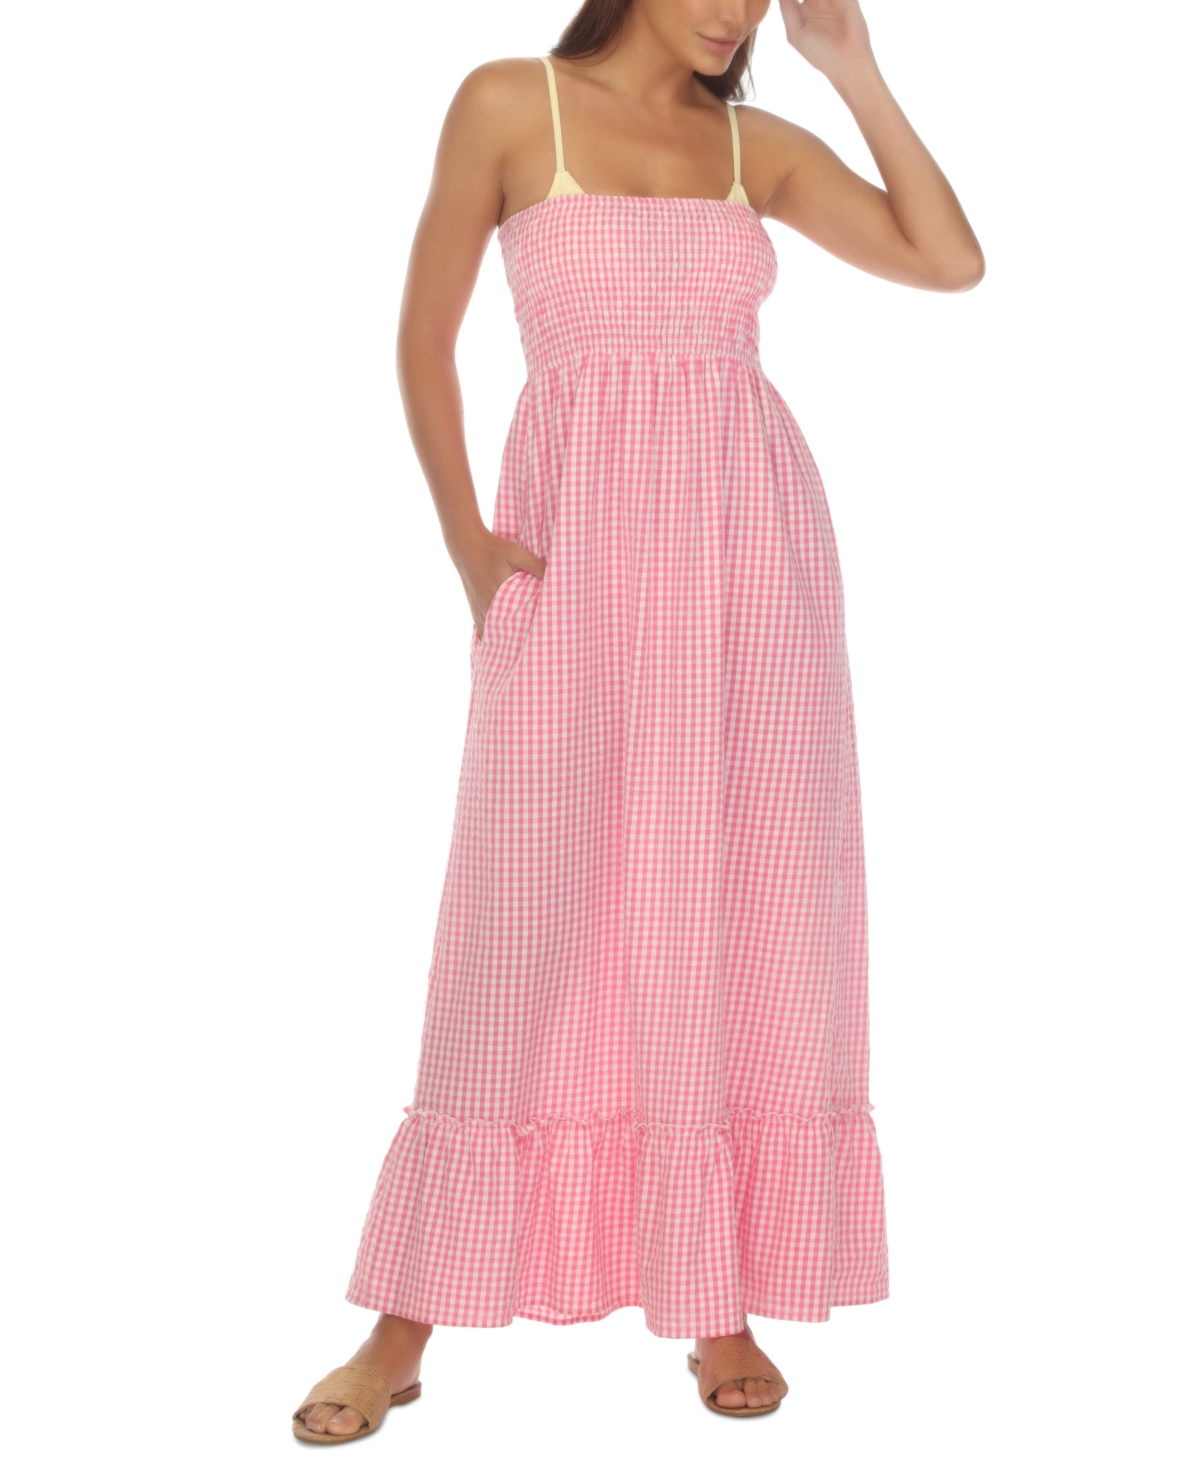 Women's Maxi Dress Cover-Up - Pink